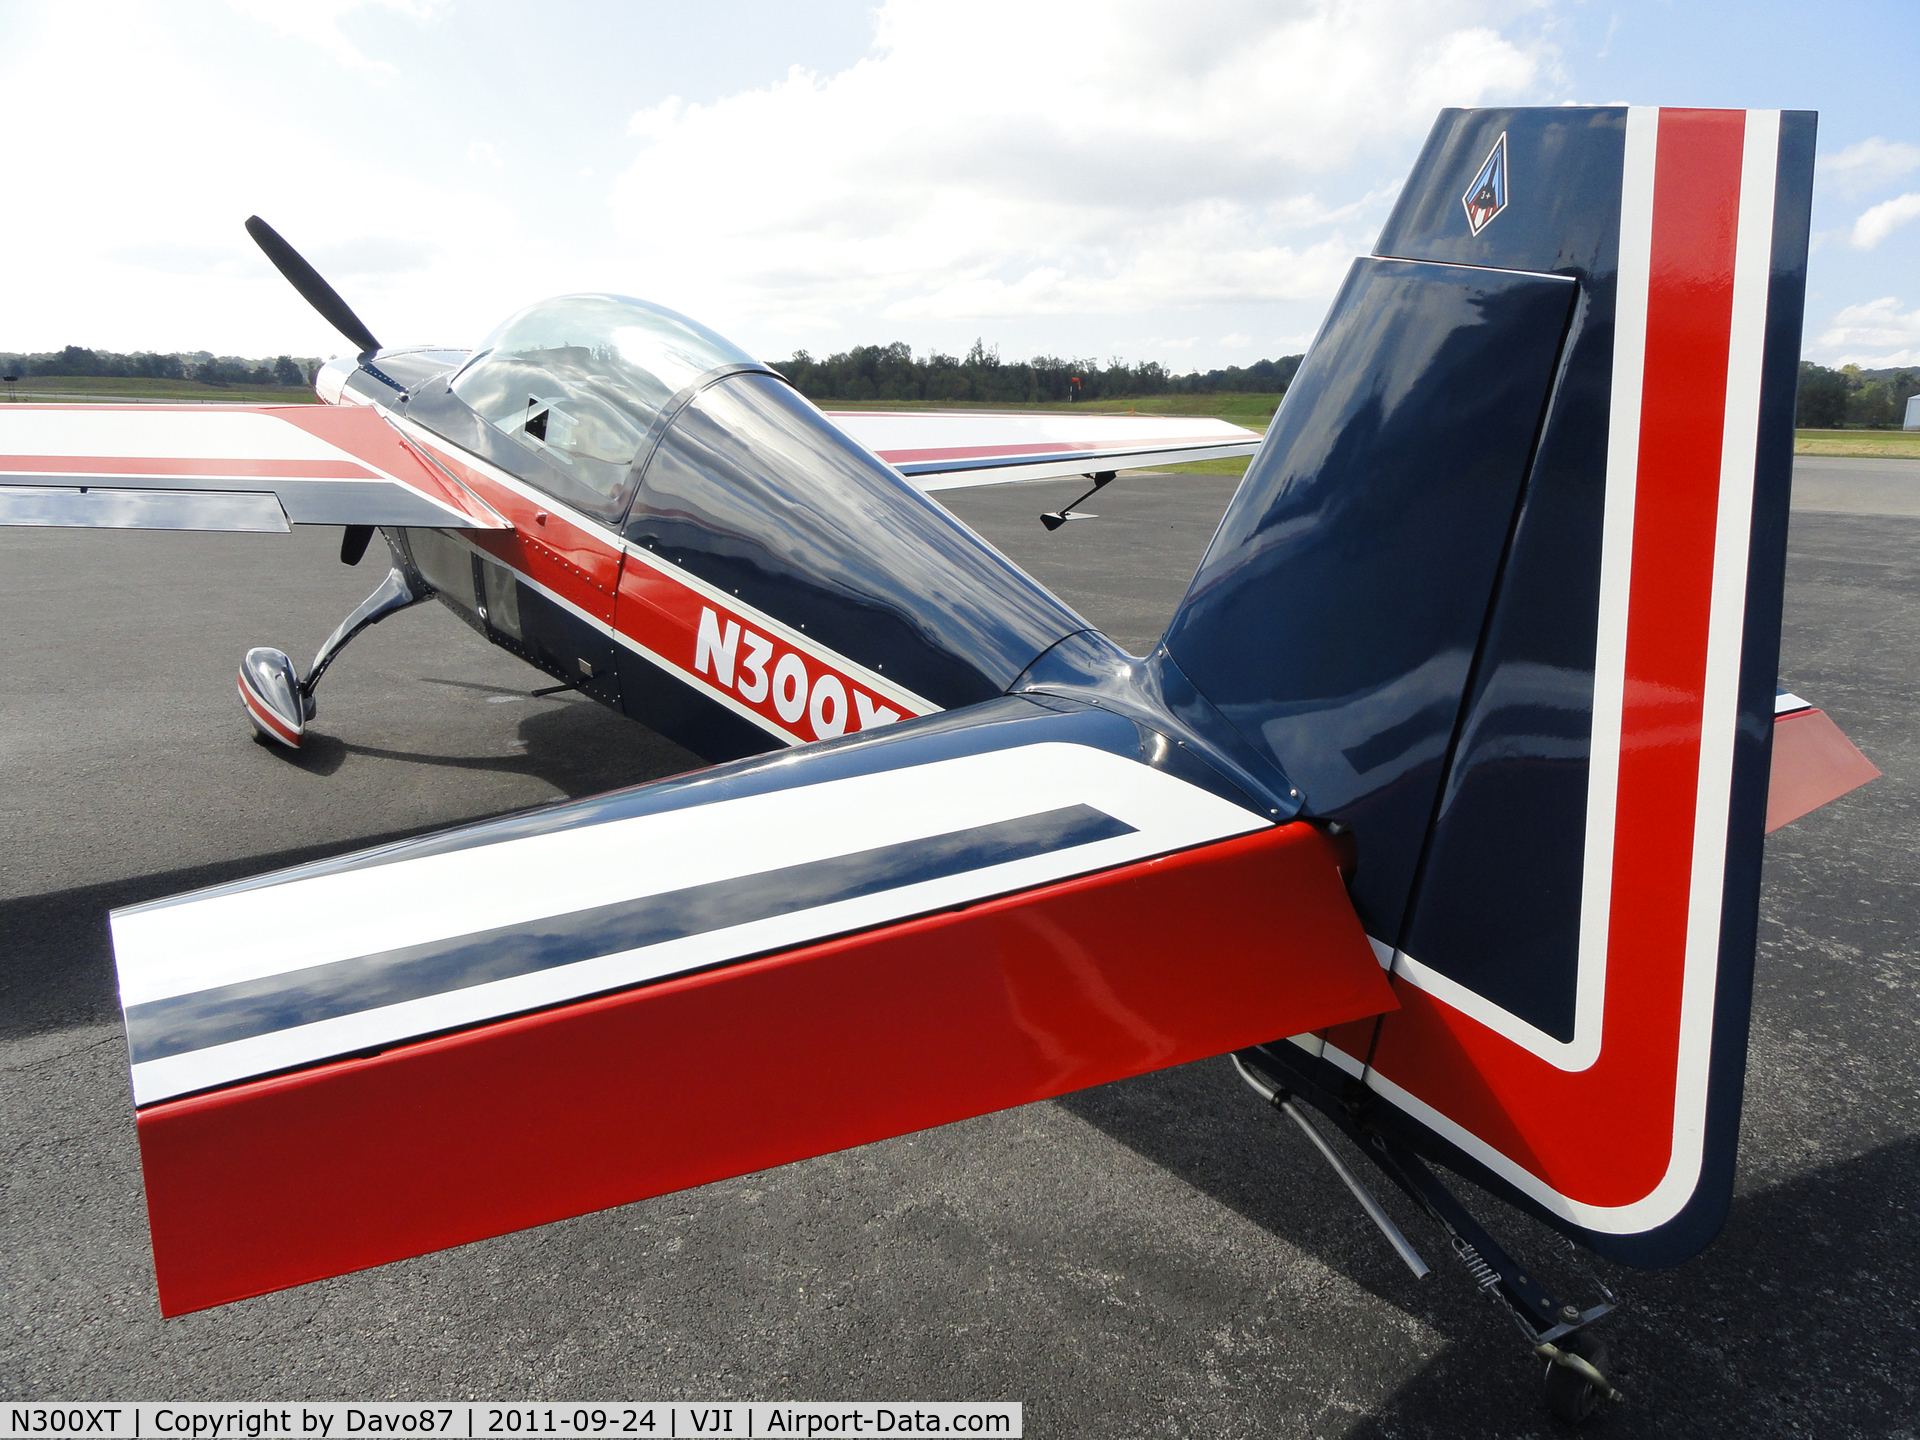 N300XT, 1991 Extra EA-300 C/N 023, Extra 300 after performing at the 2011 Abingdon, Virginia Kiwanis Club Wings and Wheels Show.